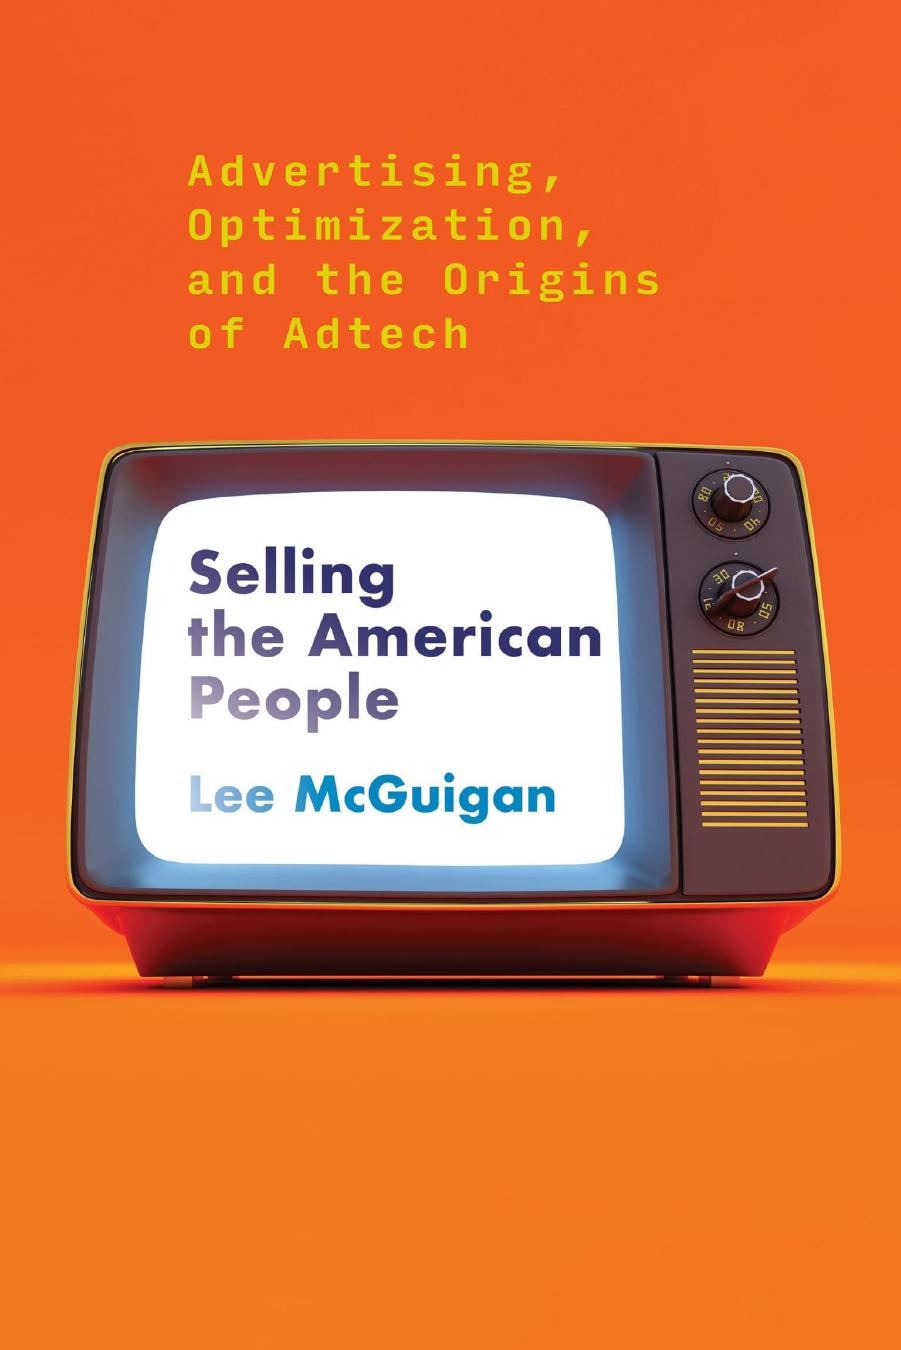 Selling The American People: Advertising, Optimization, And The Origins Of Adtech by Lee McGuigan